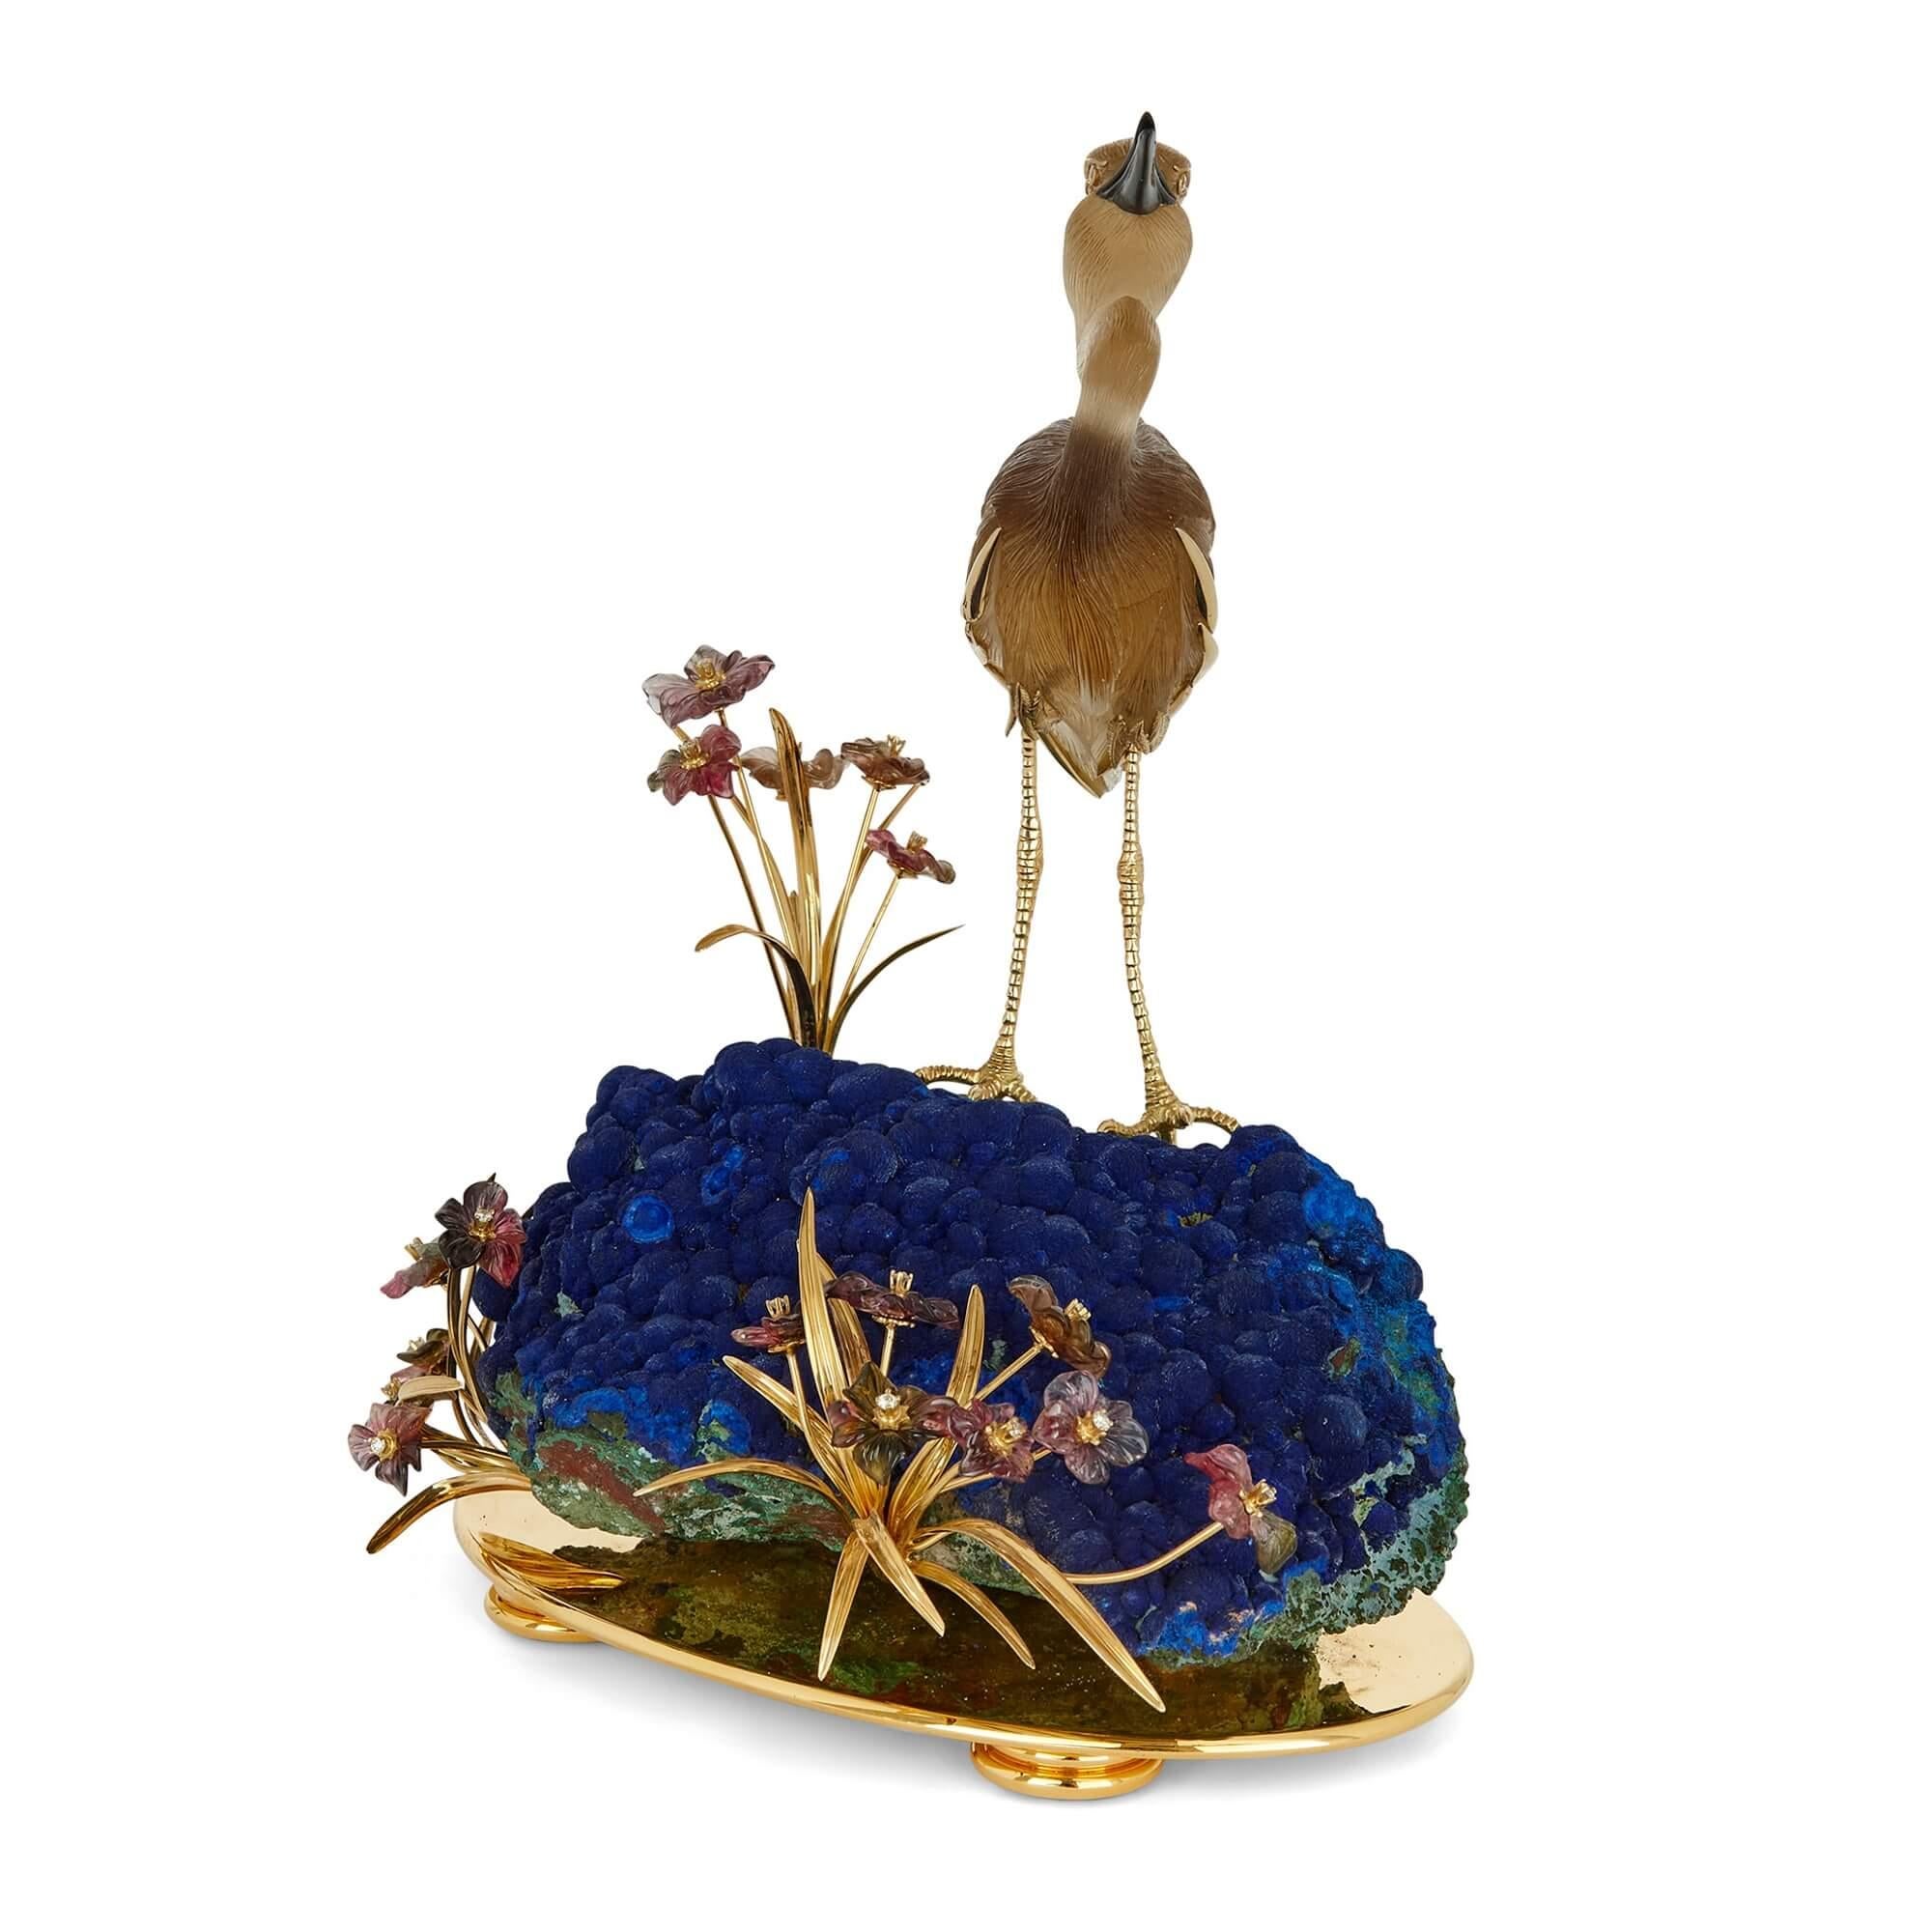 Large 18K gold, silver gilt, diamond and hardstone bird model by Asprey
English, c. 1980
Height 22cm, width 17cm, depth 15cm

Made in around 1980, by the renowned British firm of Asprey, the model depicts a heron standing on a rock among greenery